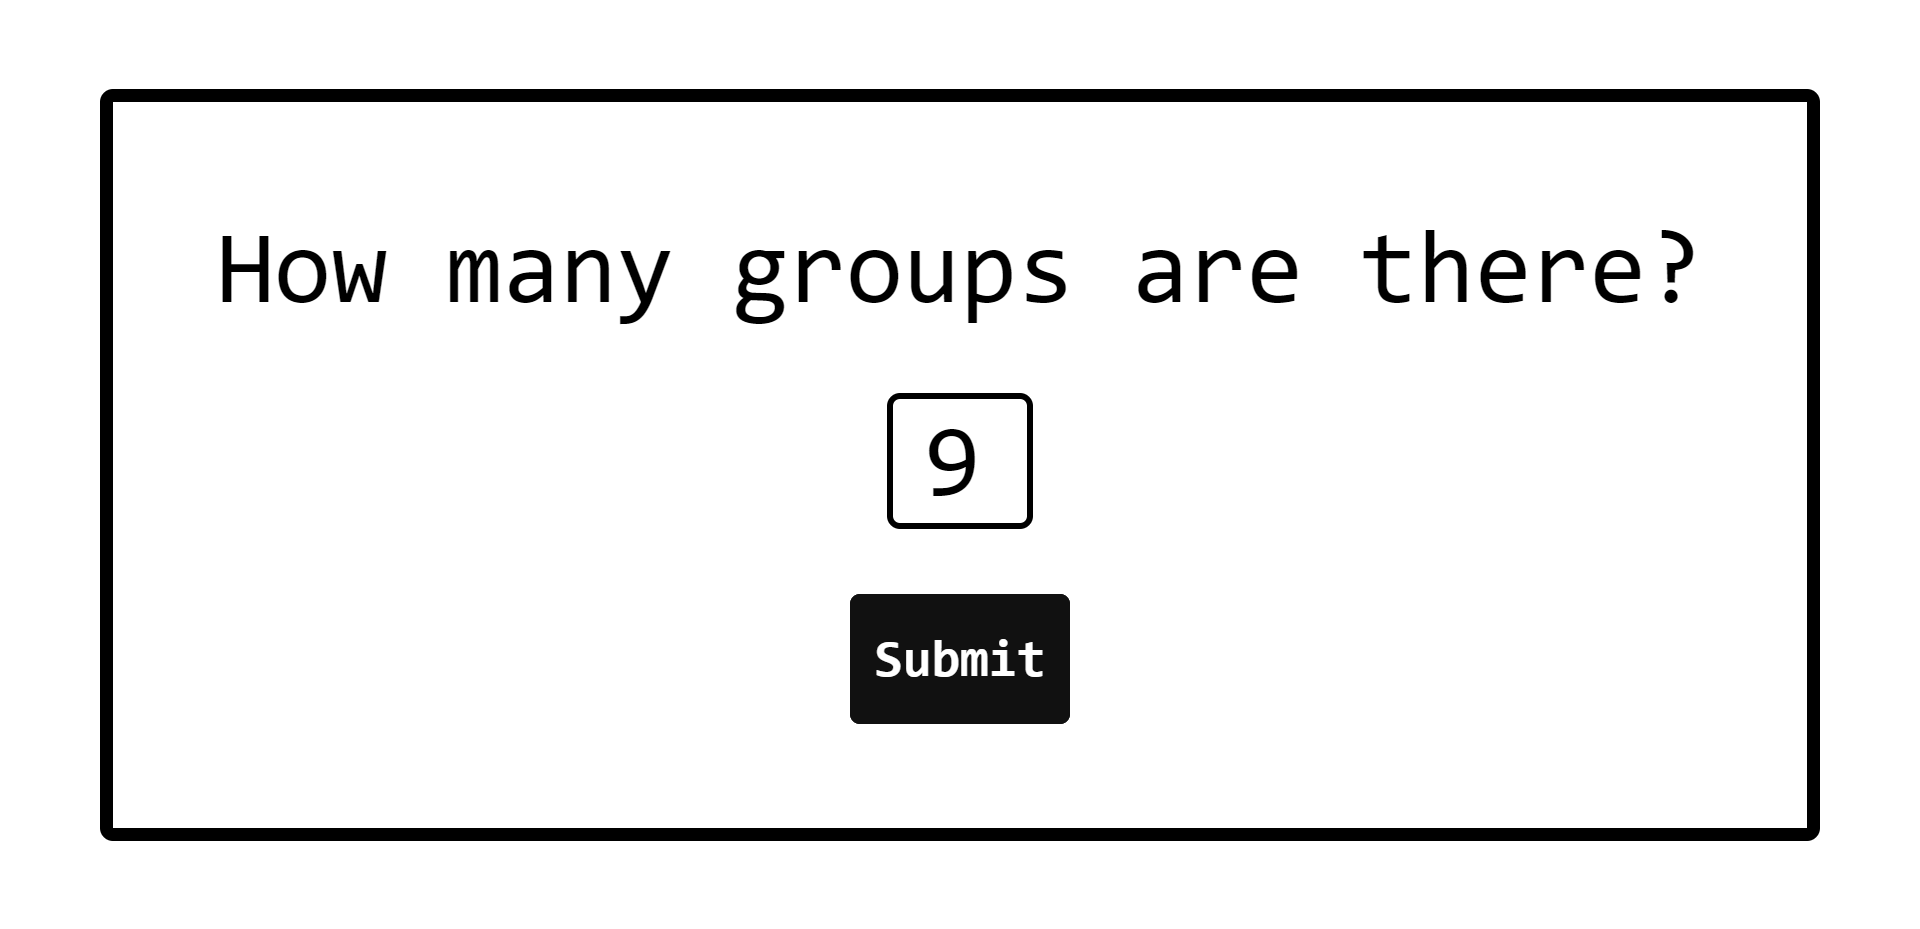 a preview image of the website. From the top it says "How many groups are there", followed by a number input box and slick submit button